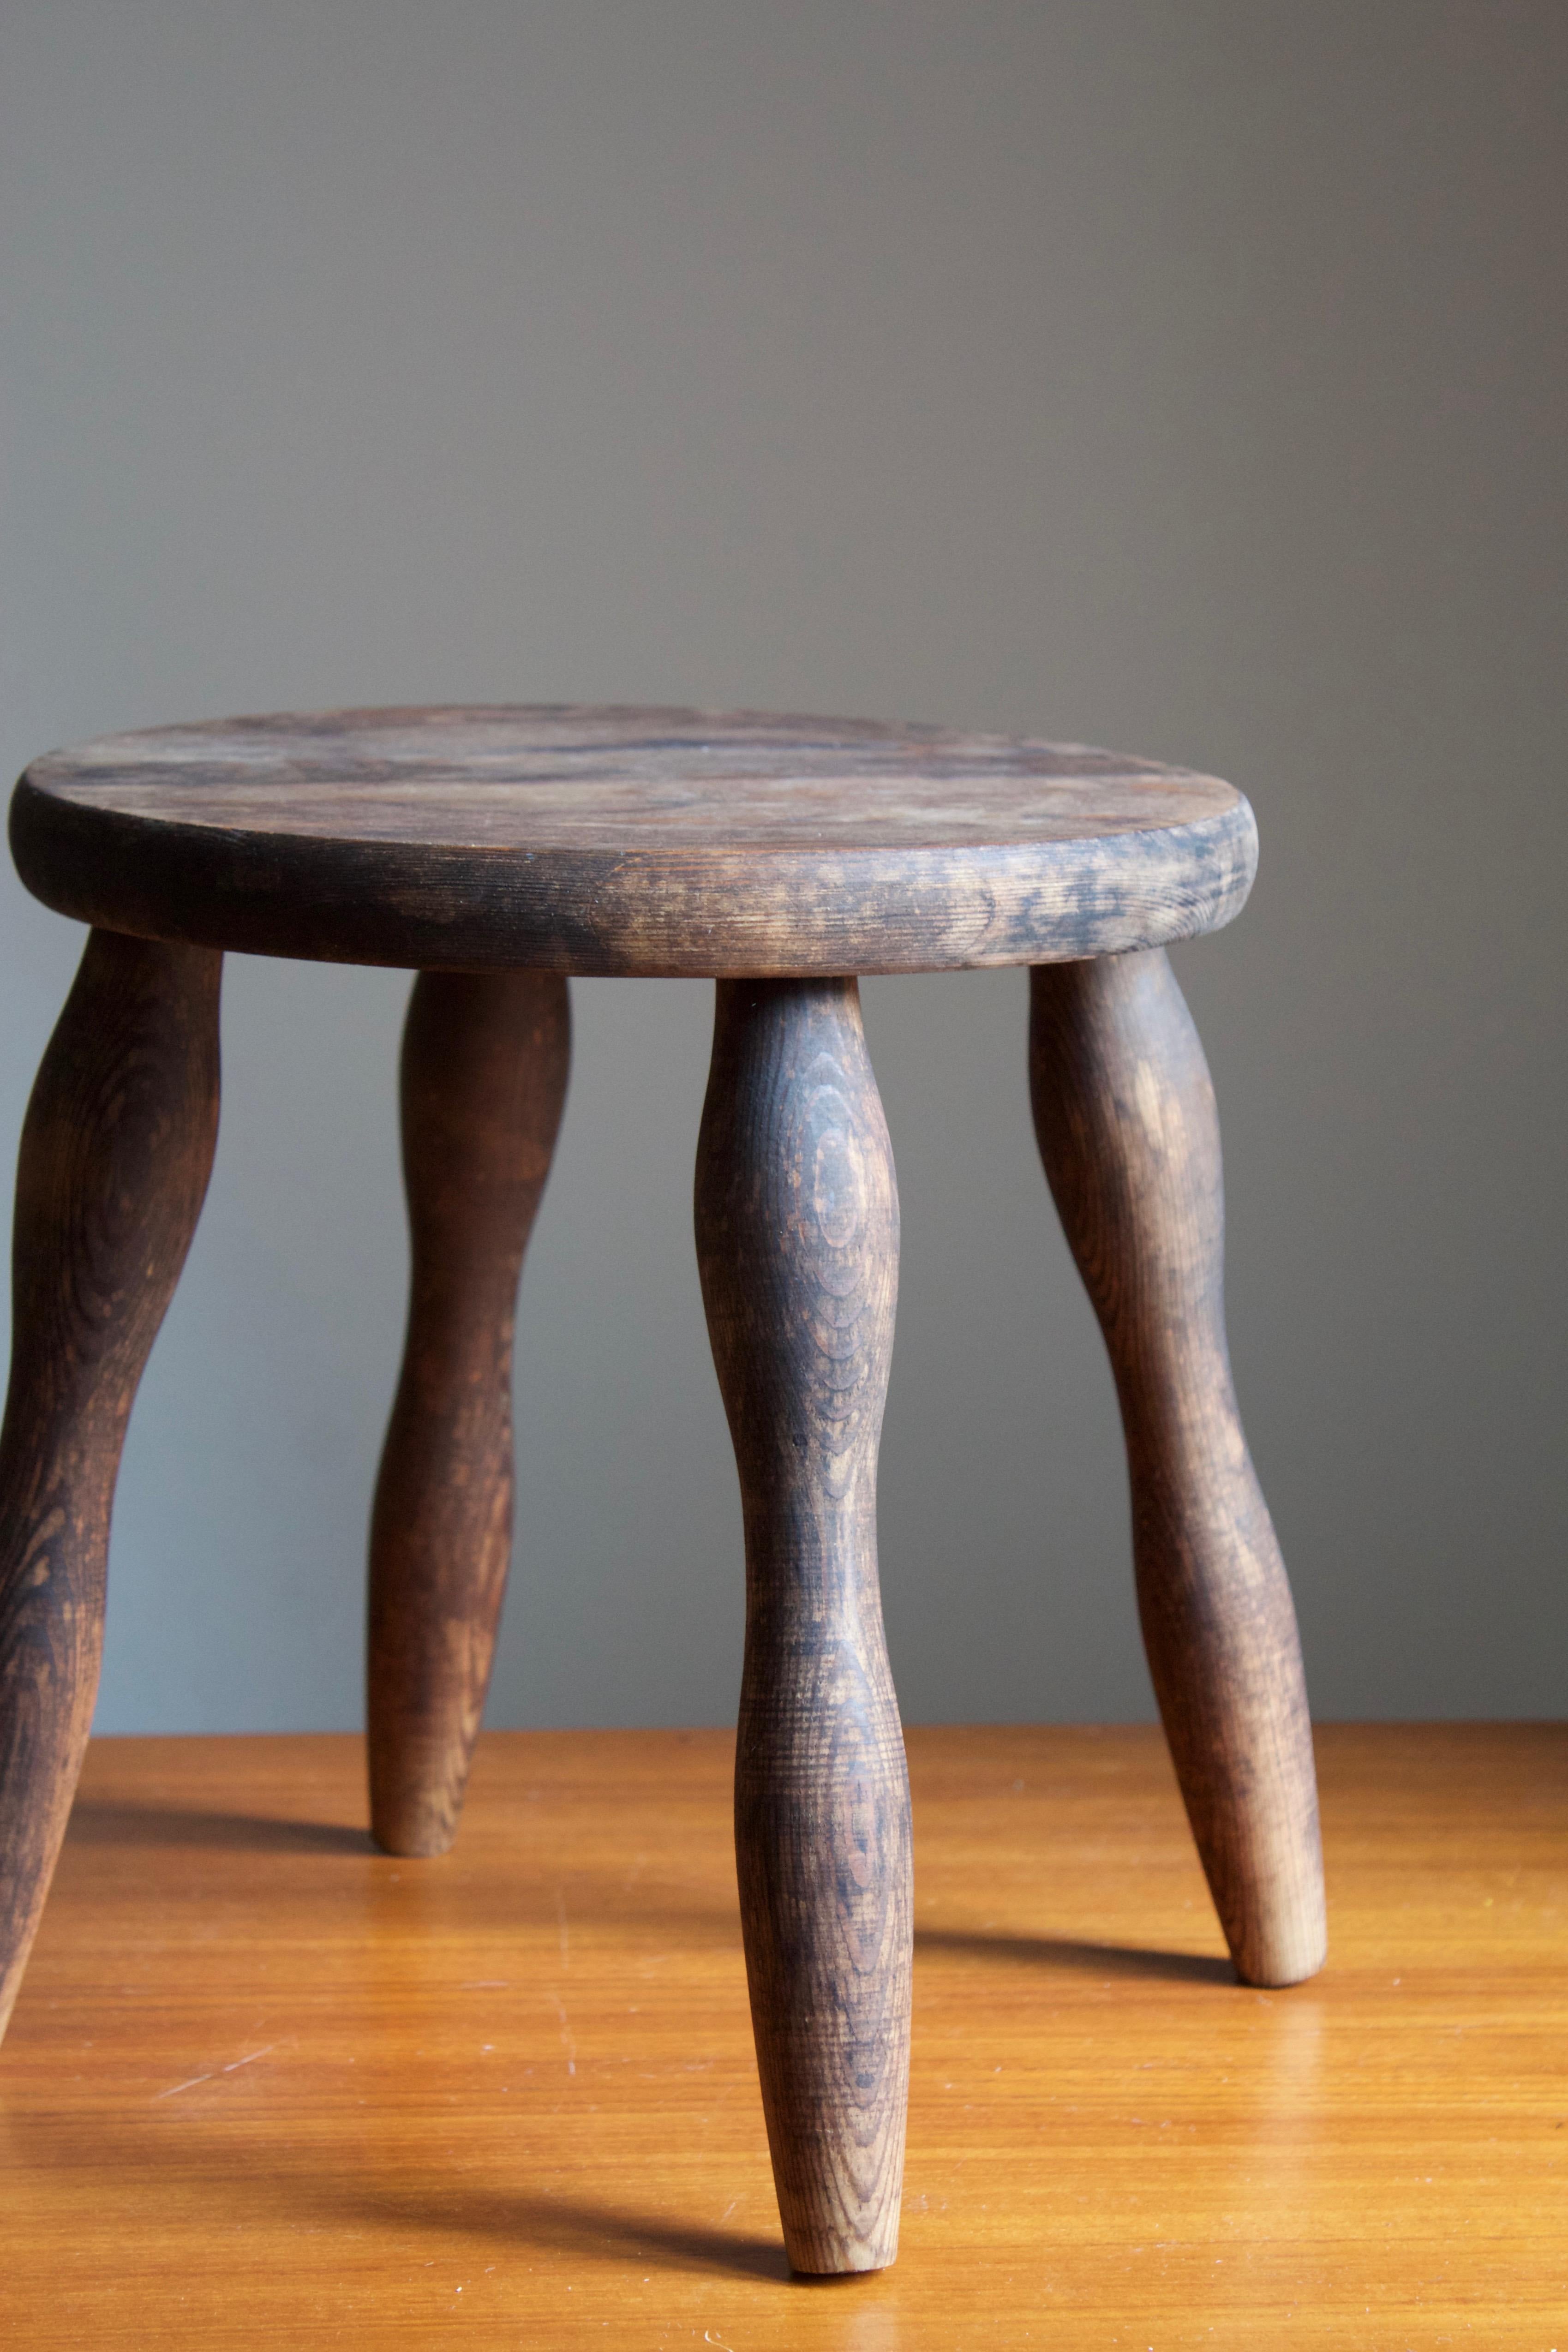 Scandinavian Modern Swedish, Stool, Solid Stained Pine, Sweden, C. 1940s